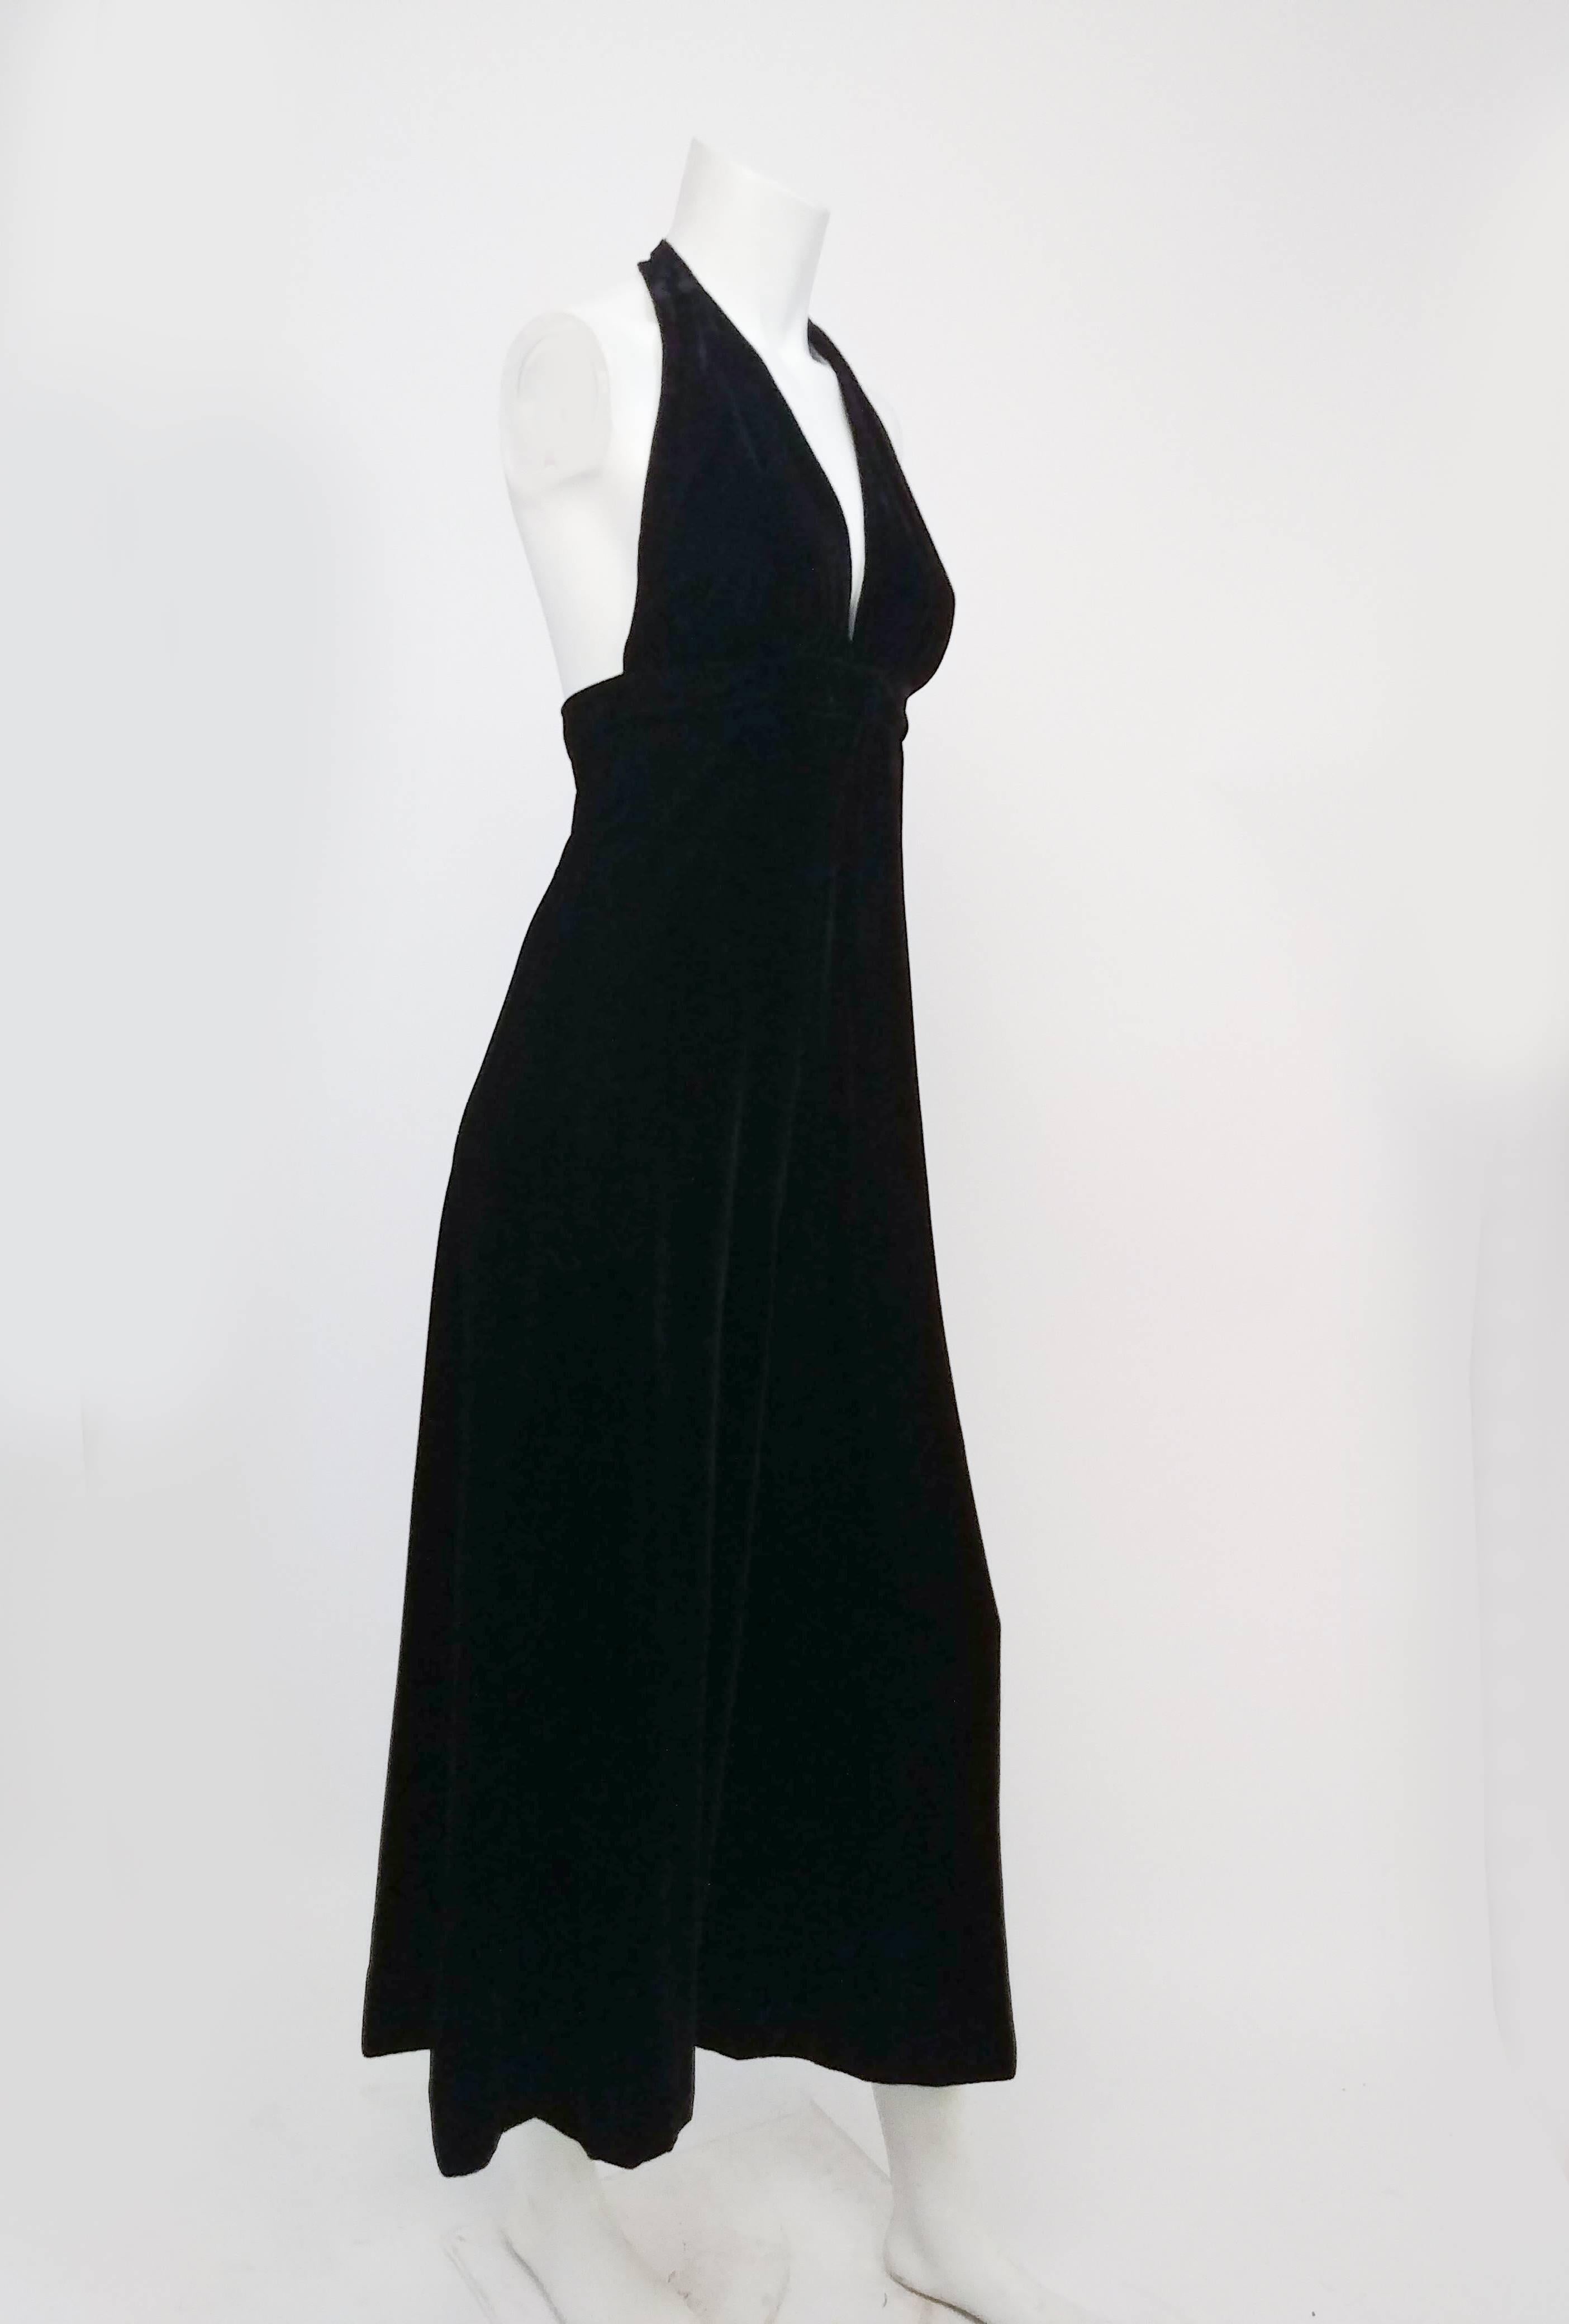 1970s Black Velvet Halter Jumpsuit. Deep-V halter neck, sexy open back. Wide legged pants for lots of movement and drama, zips up back and buttons. 